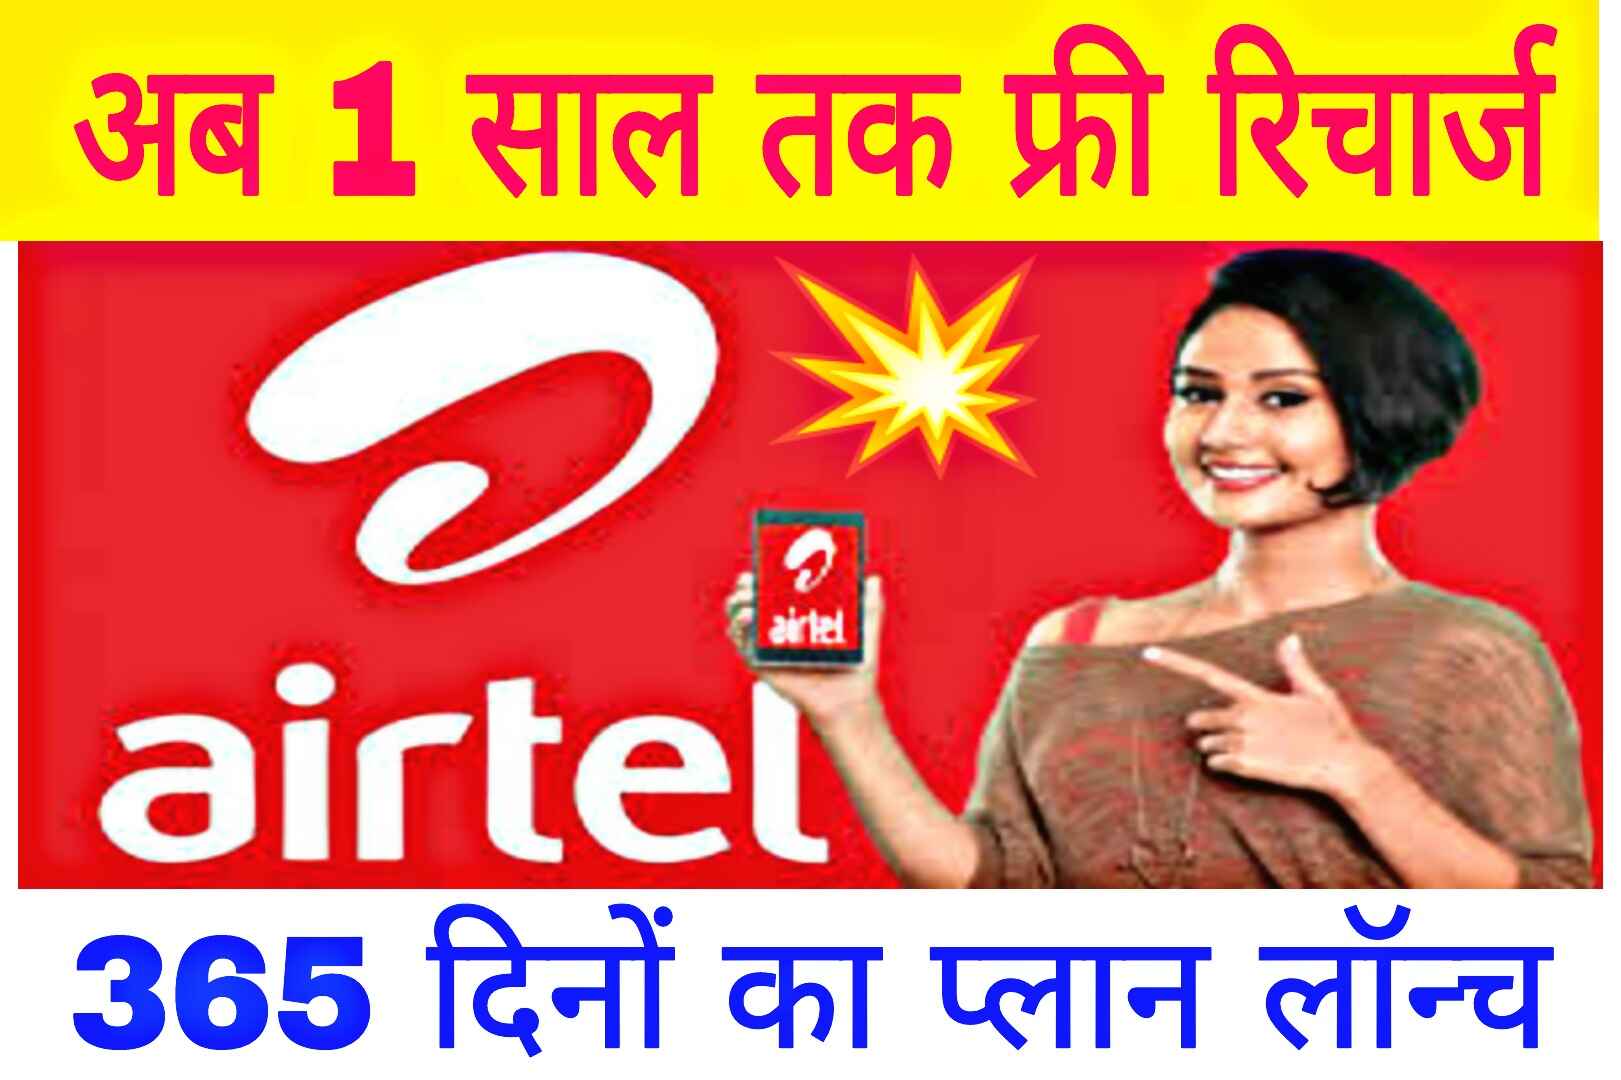 Airtel Unlimited Calling And Internet Recharge Plan For 365 Days